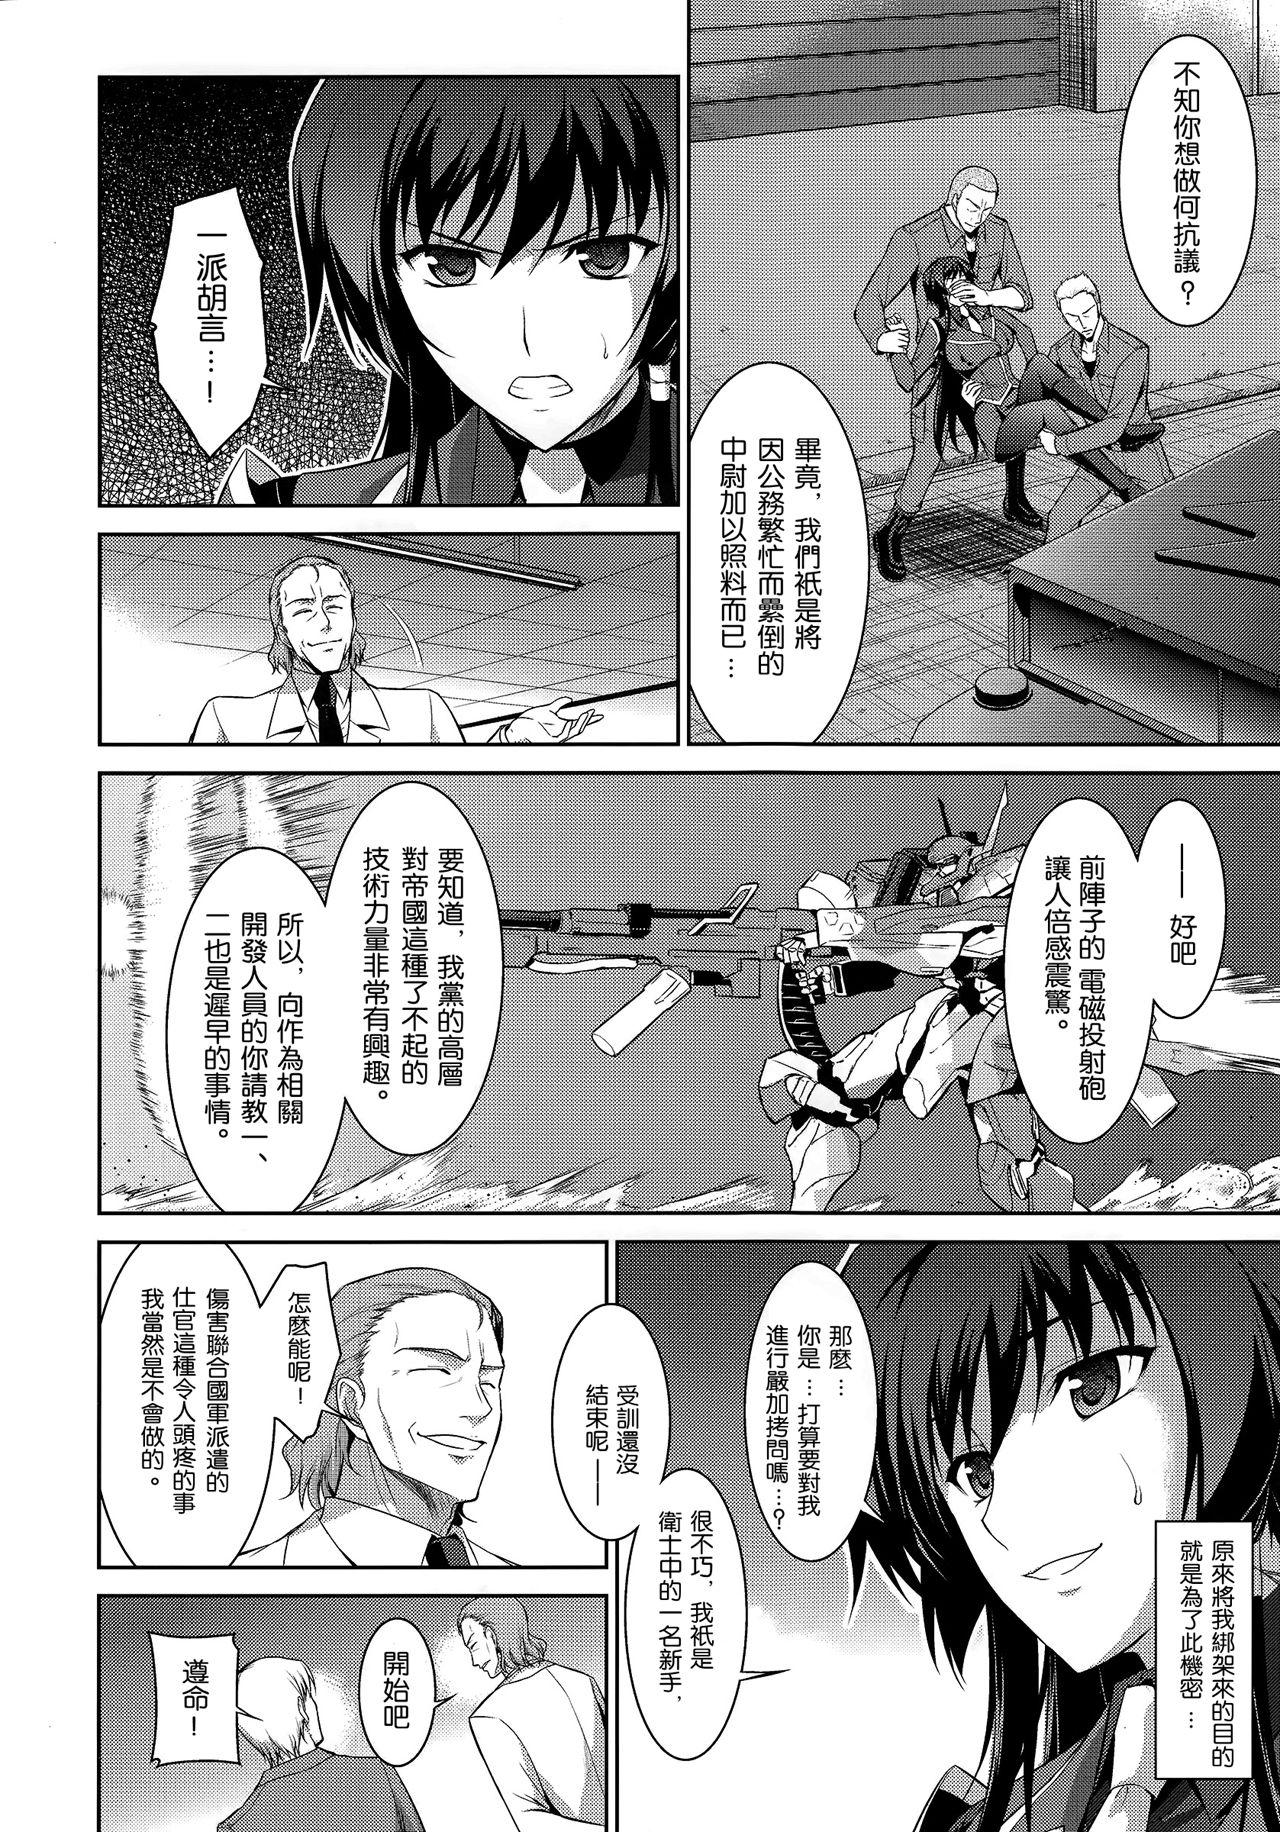 Gay Group Ouka Chiru! - Muv luv alternative total eclipse Gorgeous - Page 6